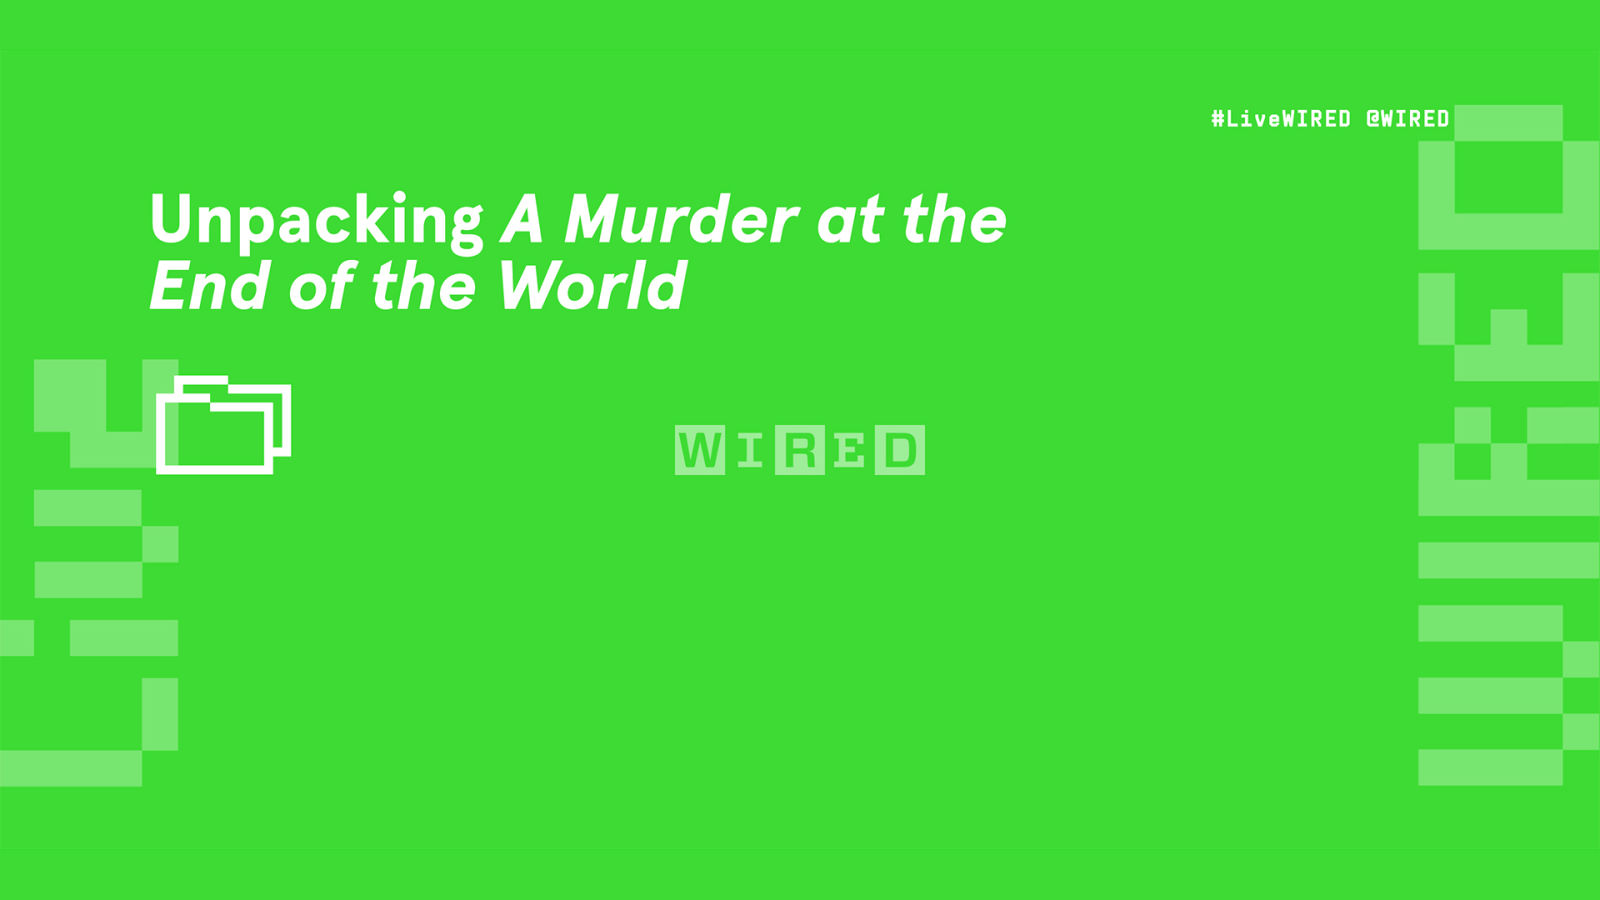 Unpacking a Murder at the End of the World